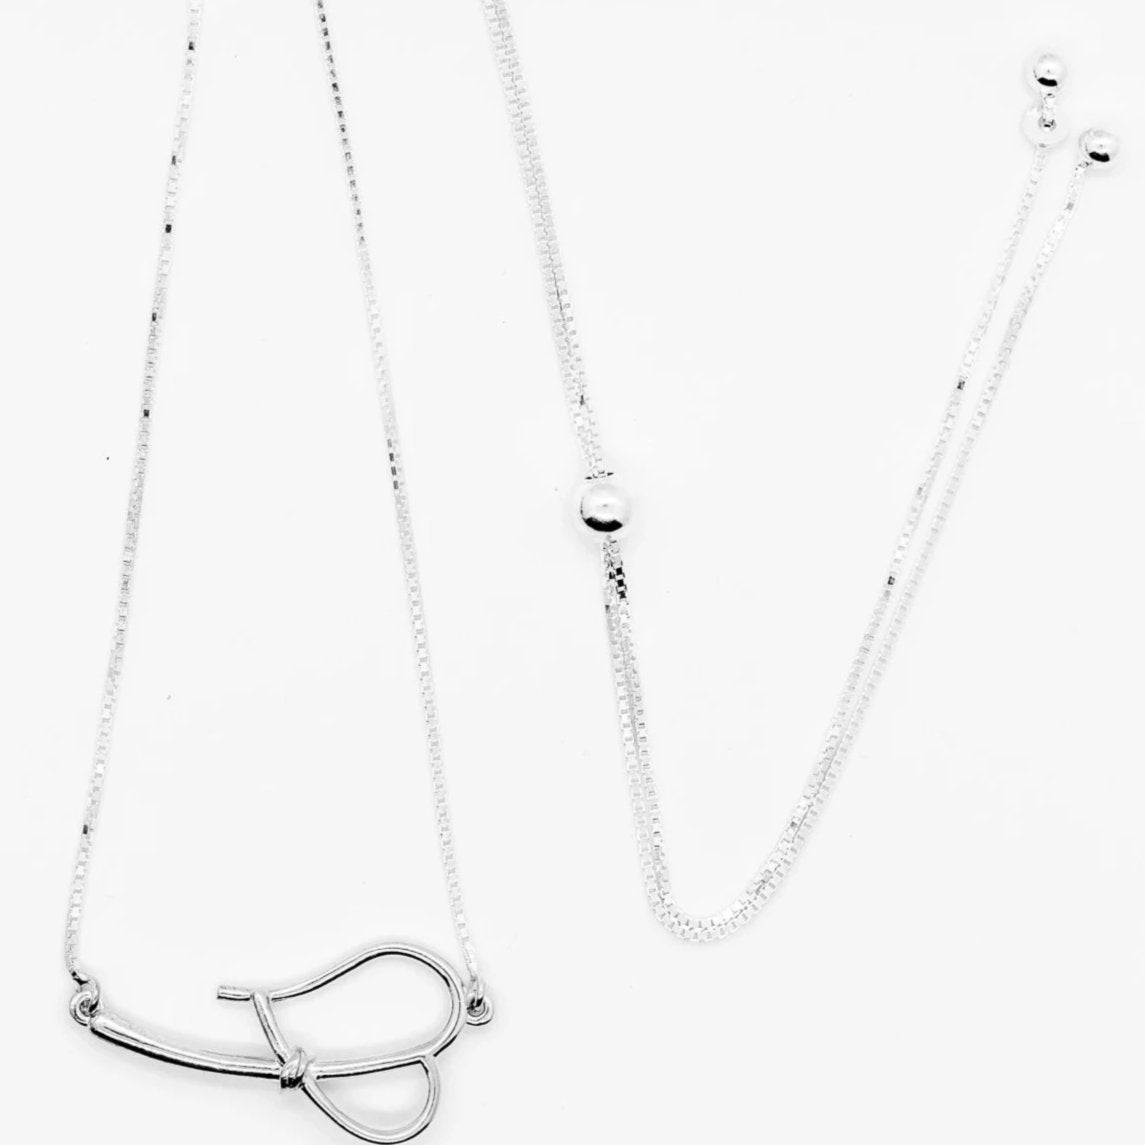 Horizontal Heartstrings Necklace. What tugs on your heartstrings?